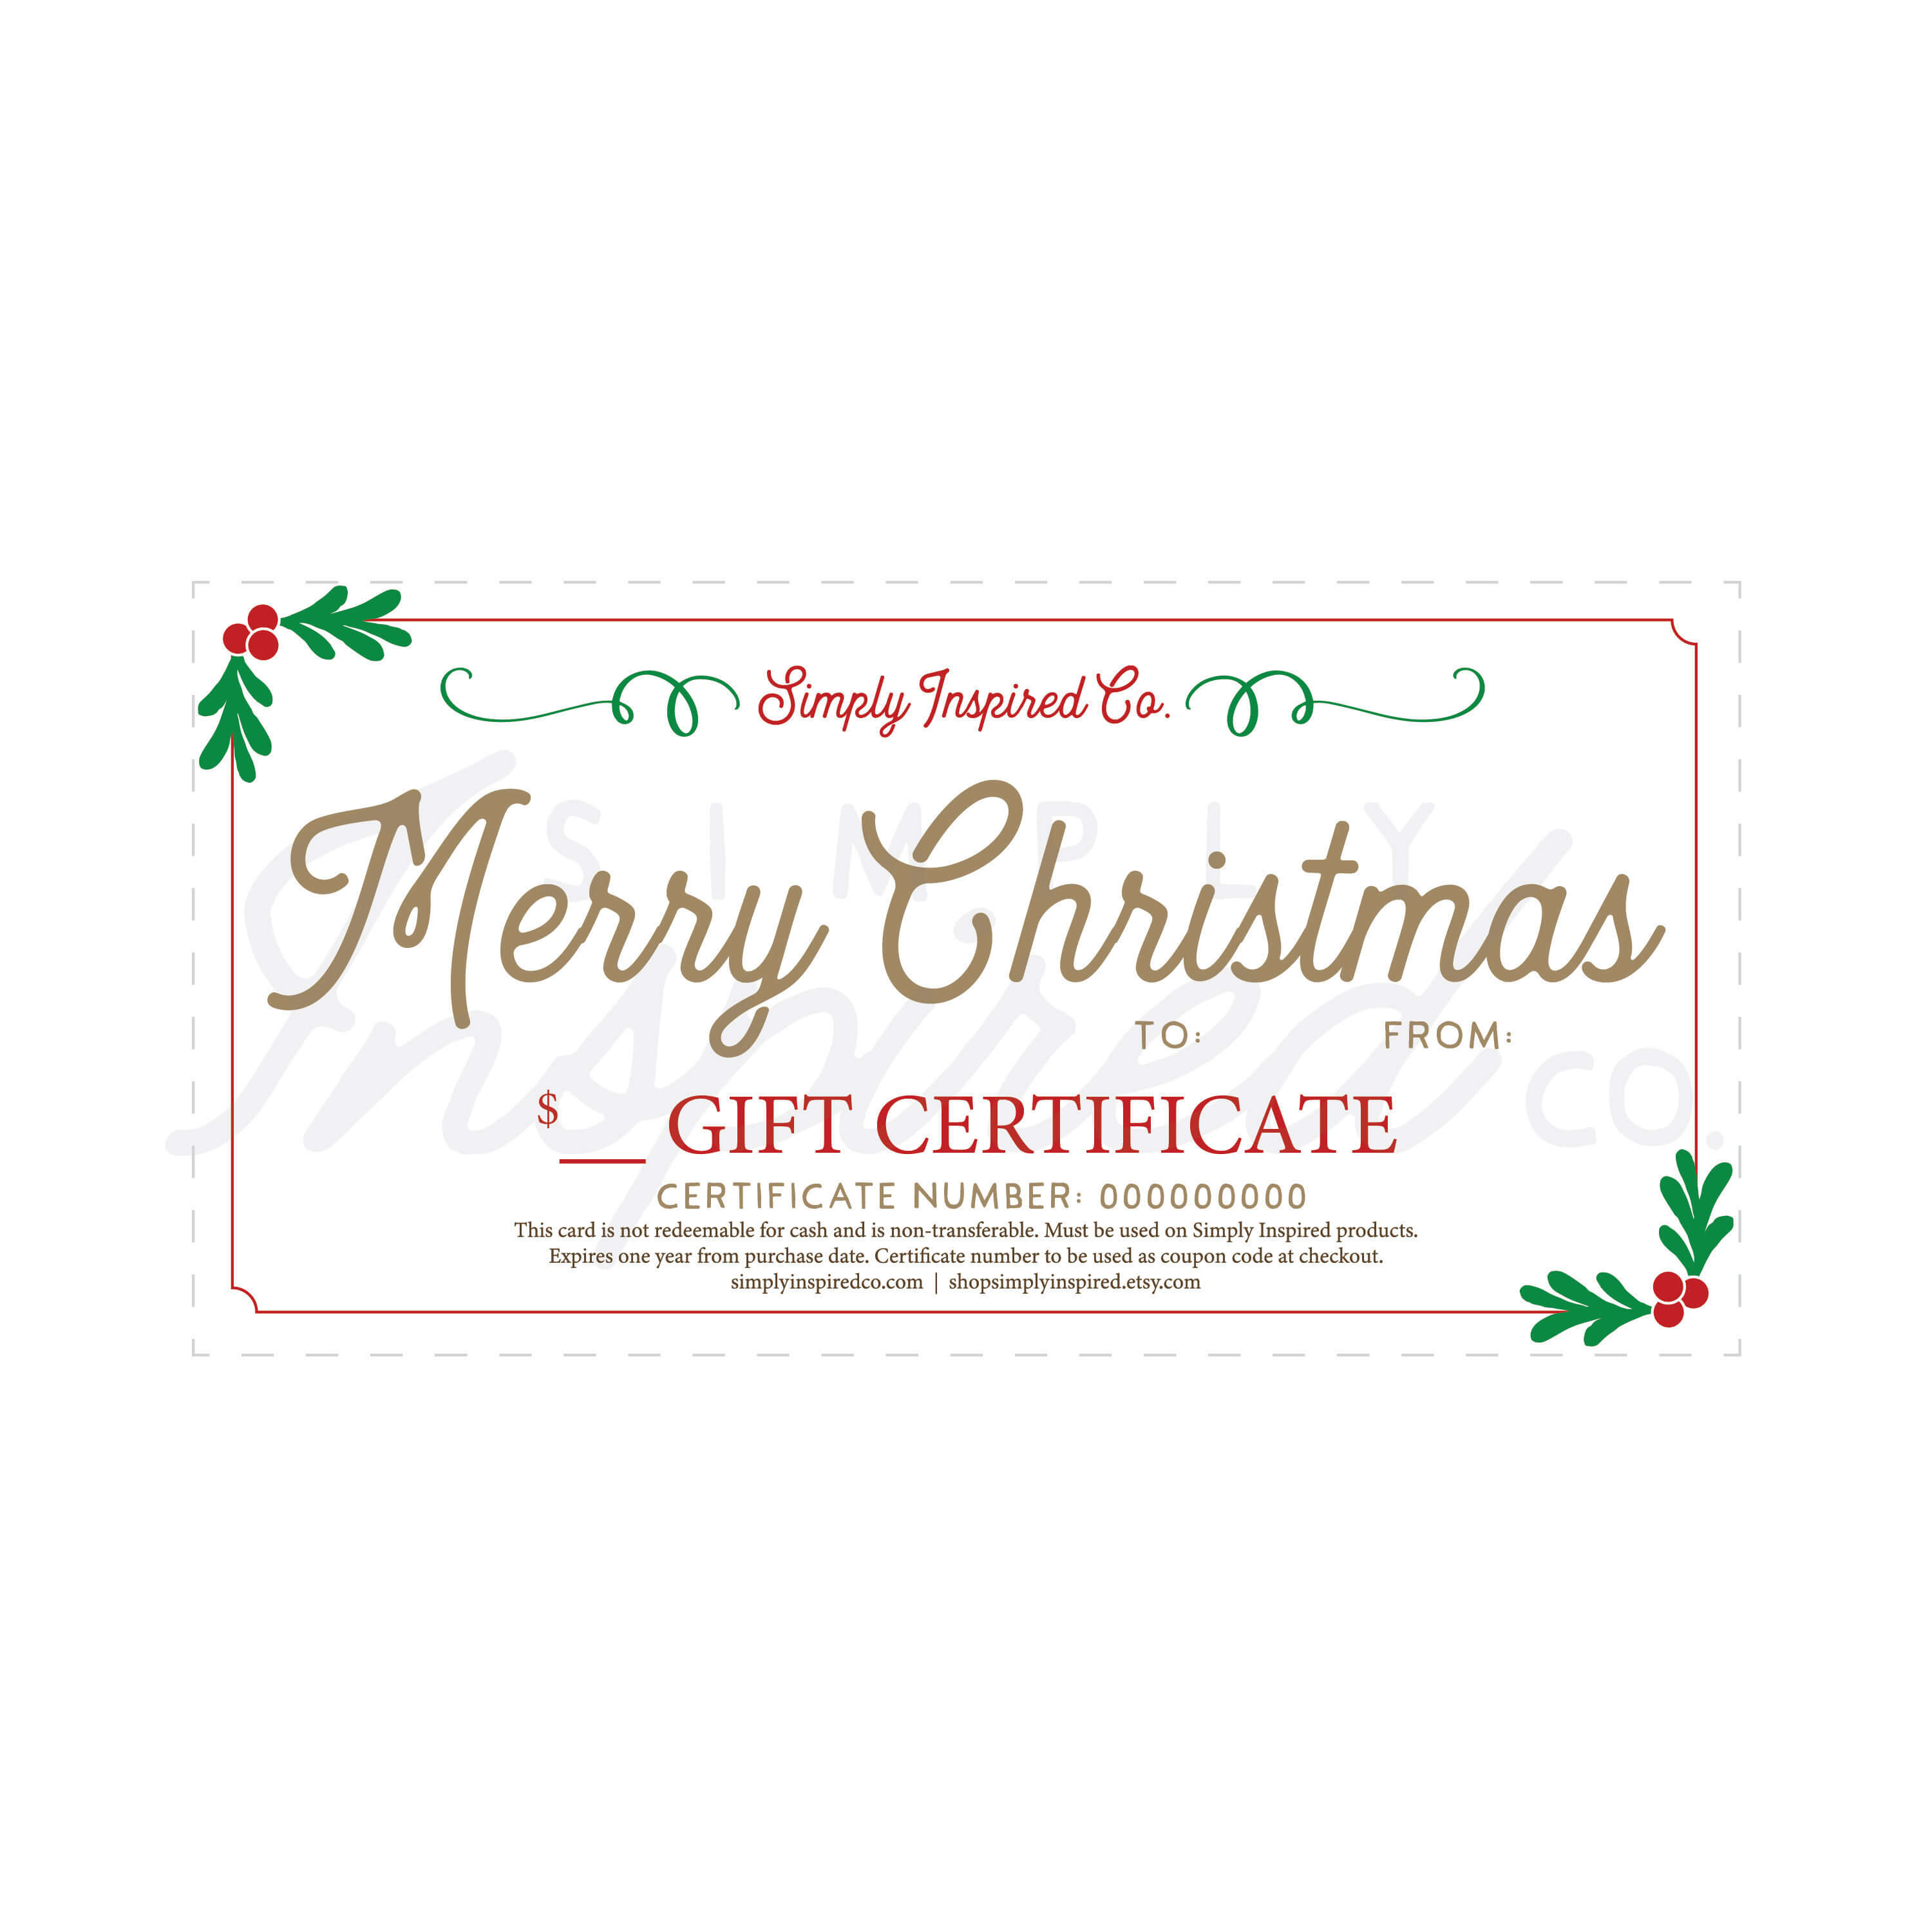 Merry Christmas Gift Certificate – Gift – Christmas – Gift Certificate –  Holidays – Giving – Presents – Gift Card – Simply Inspired With Merry Christmas Gift Certificate Templates